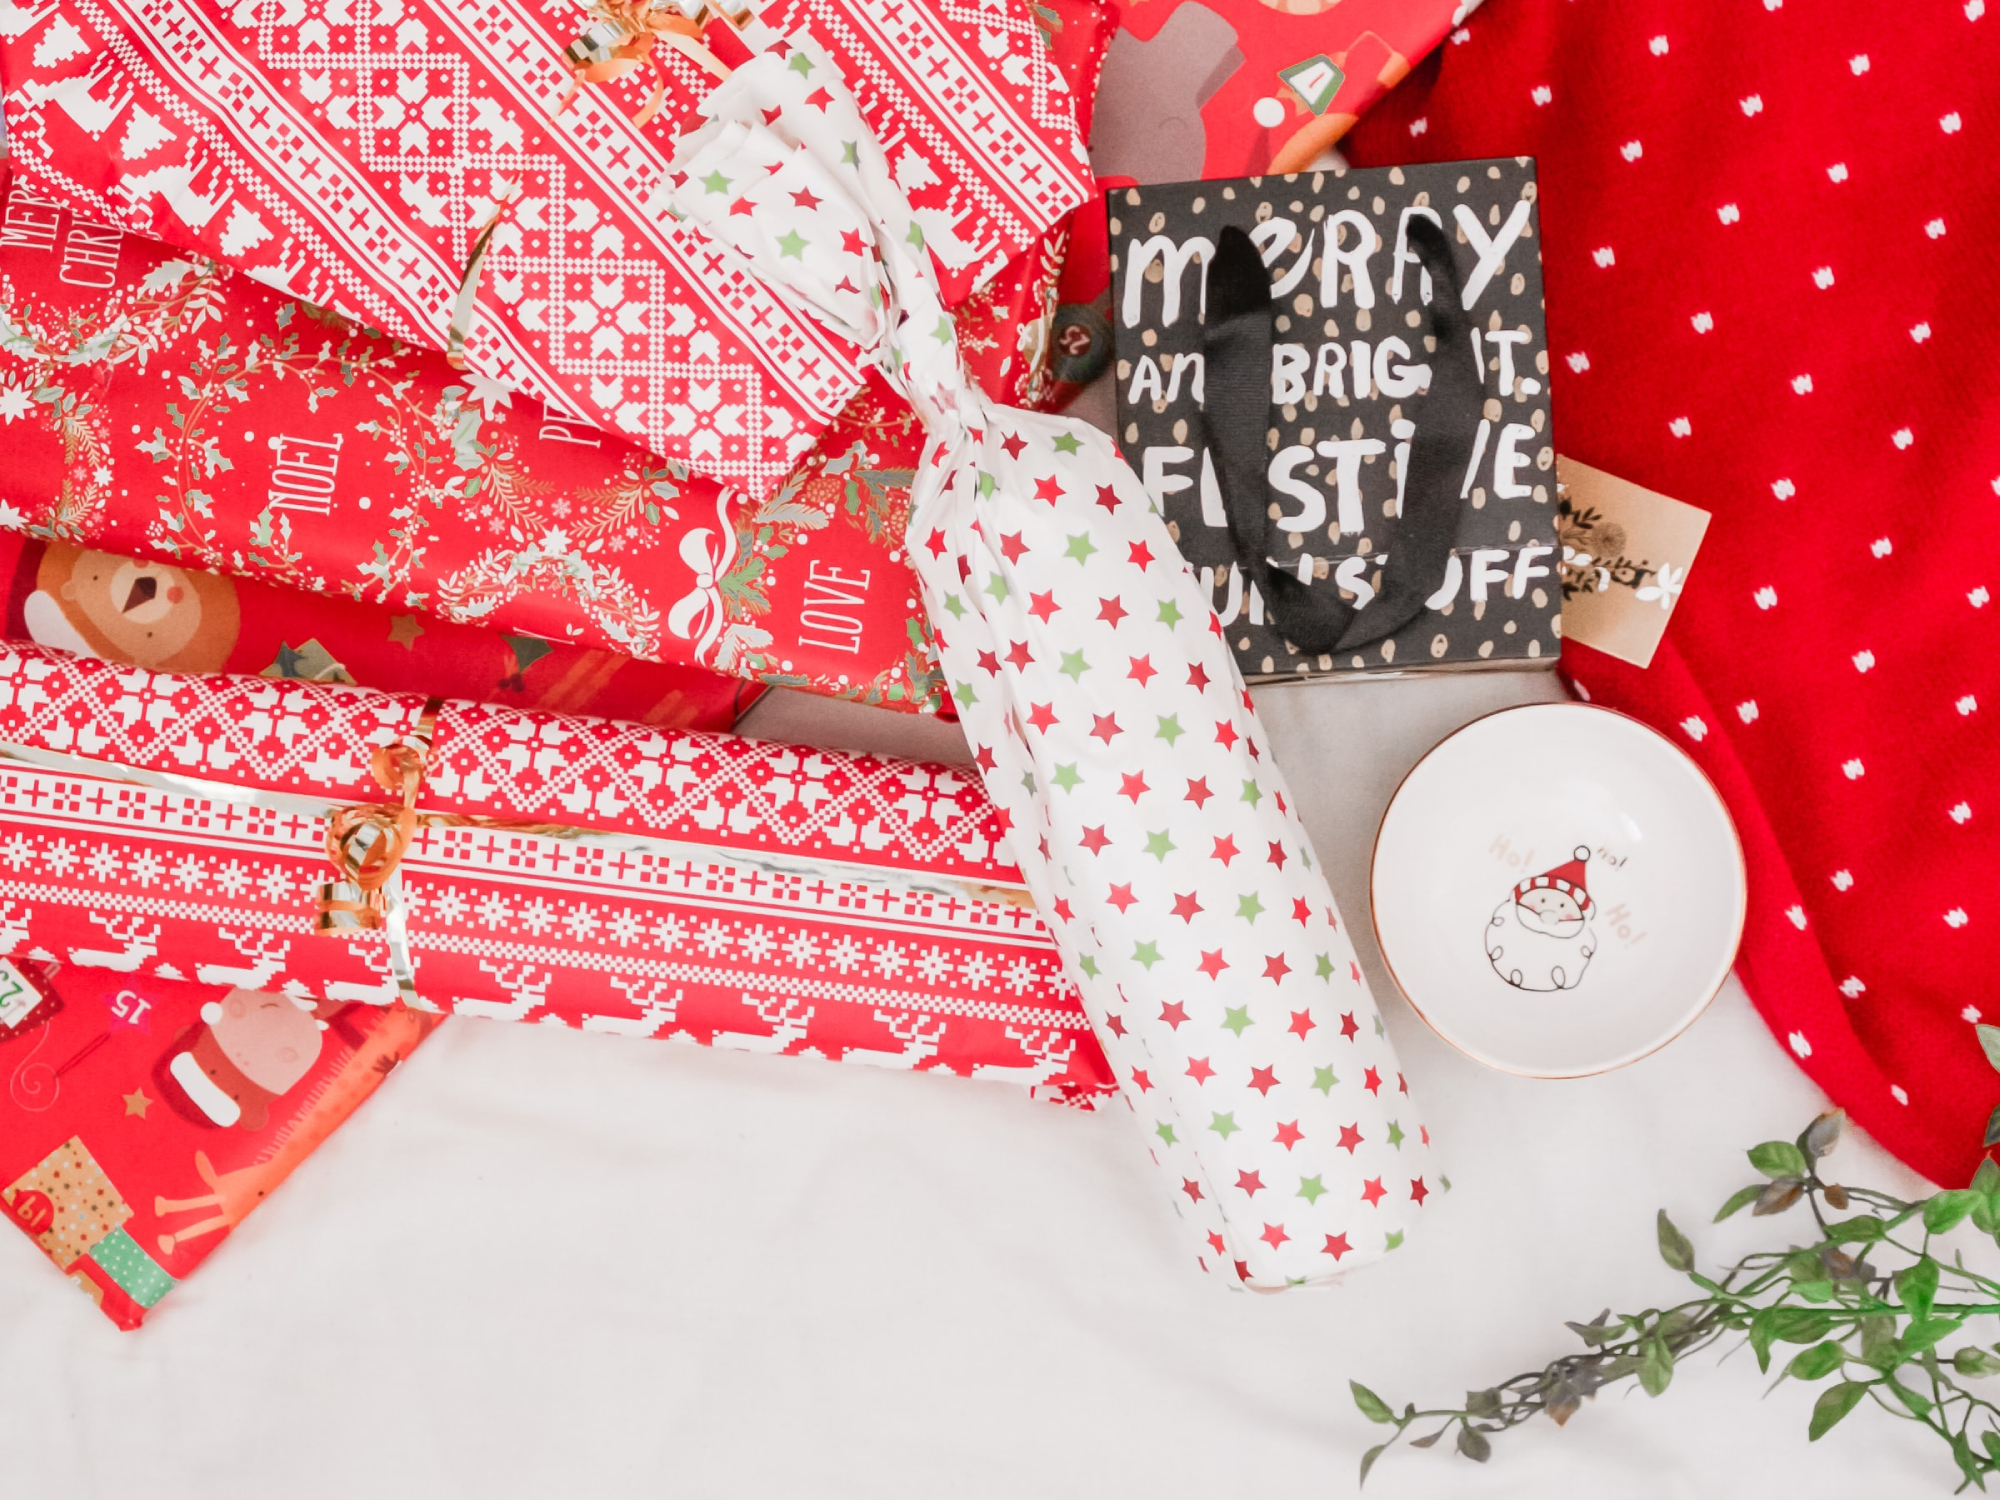 How to Make a Gift Bag Out of Wrapping Paper - A Beautiful Mess